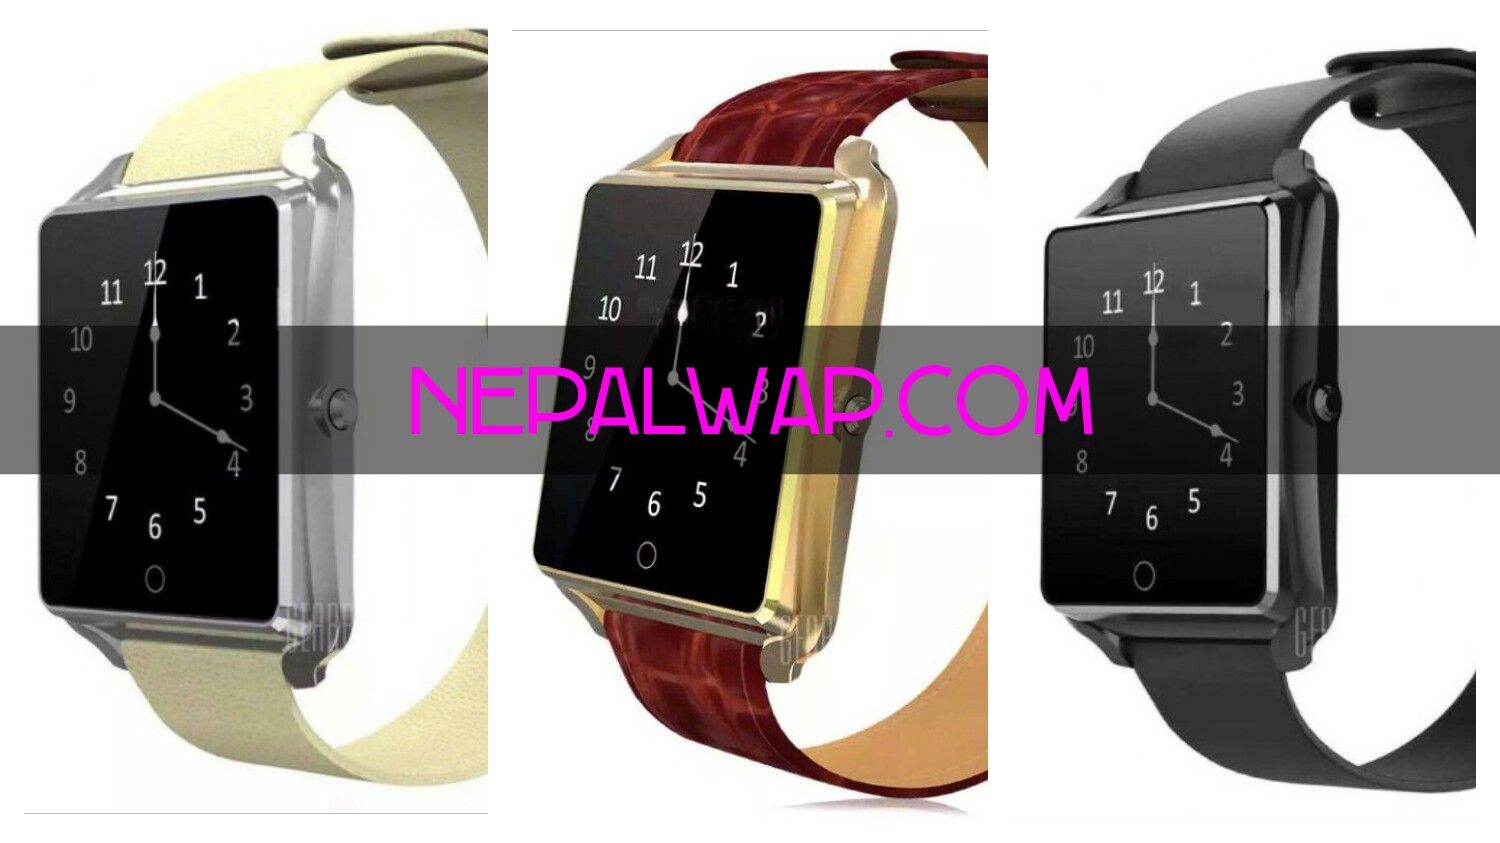 CG iWear smartwatch launched in Nepal cheapest smartwatch in Nepal